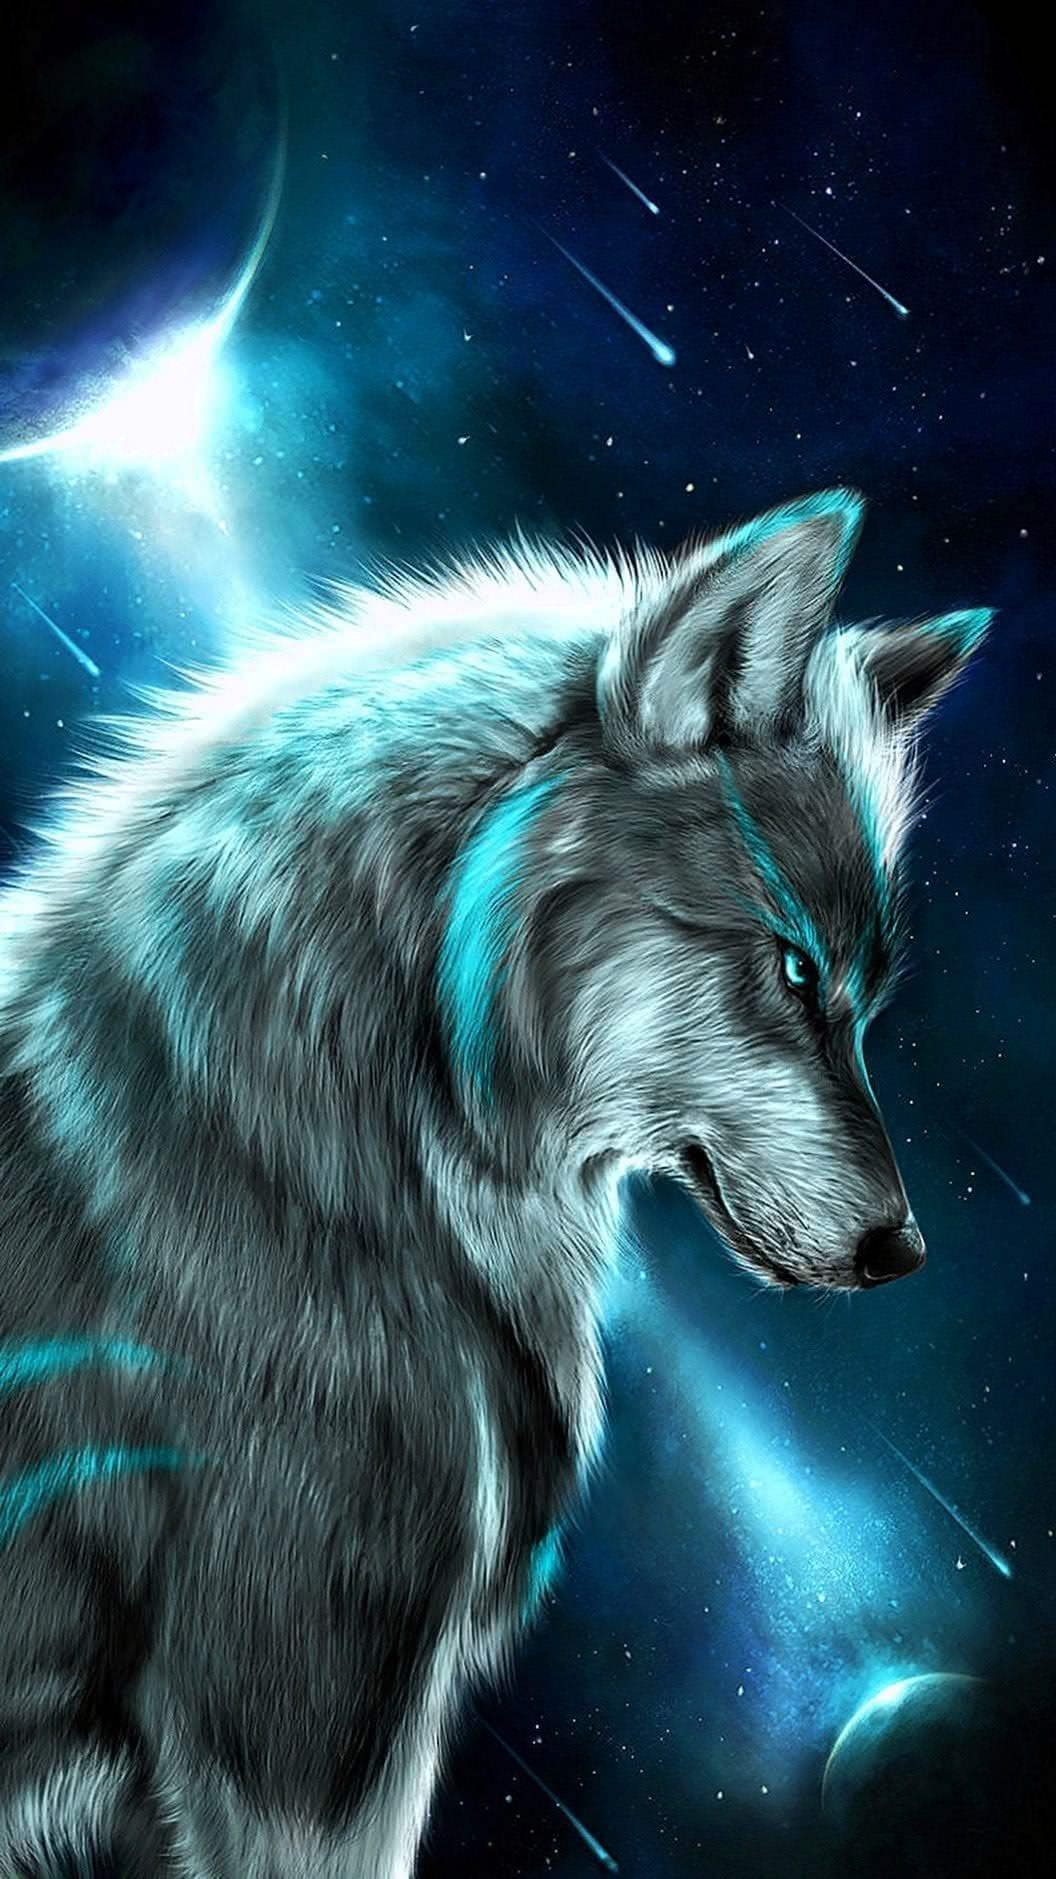 Wolf Wallpapers 1080x1080 free download